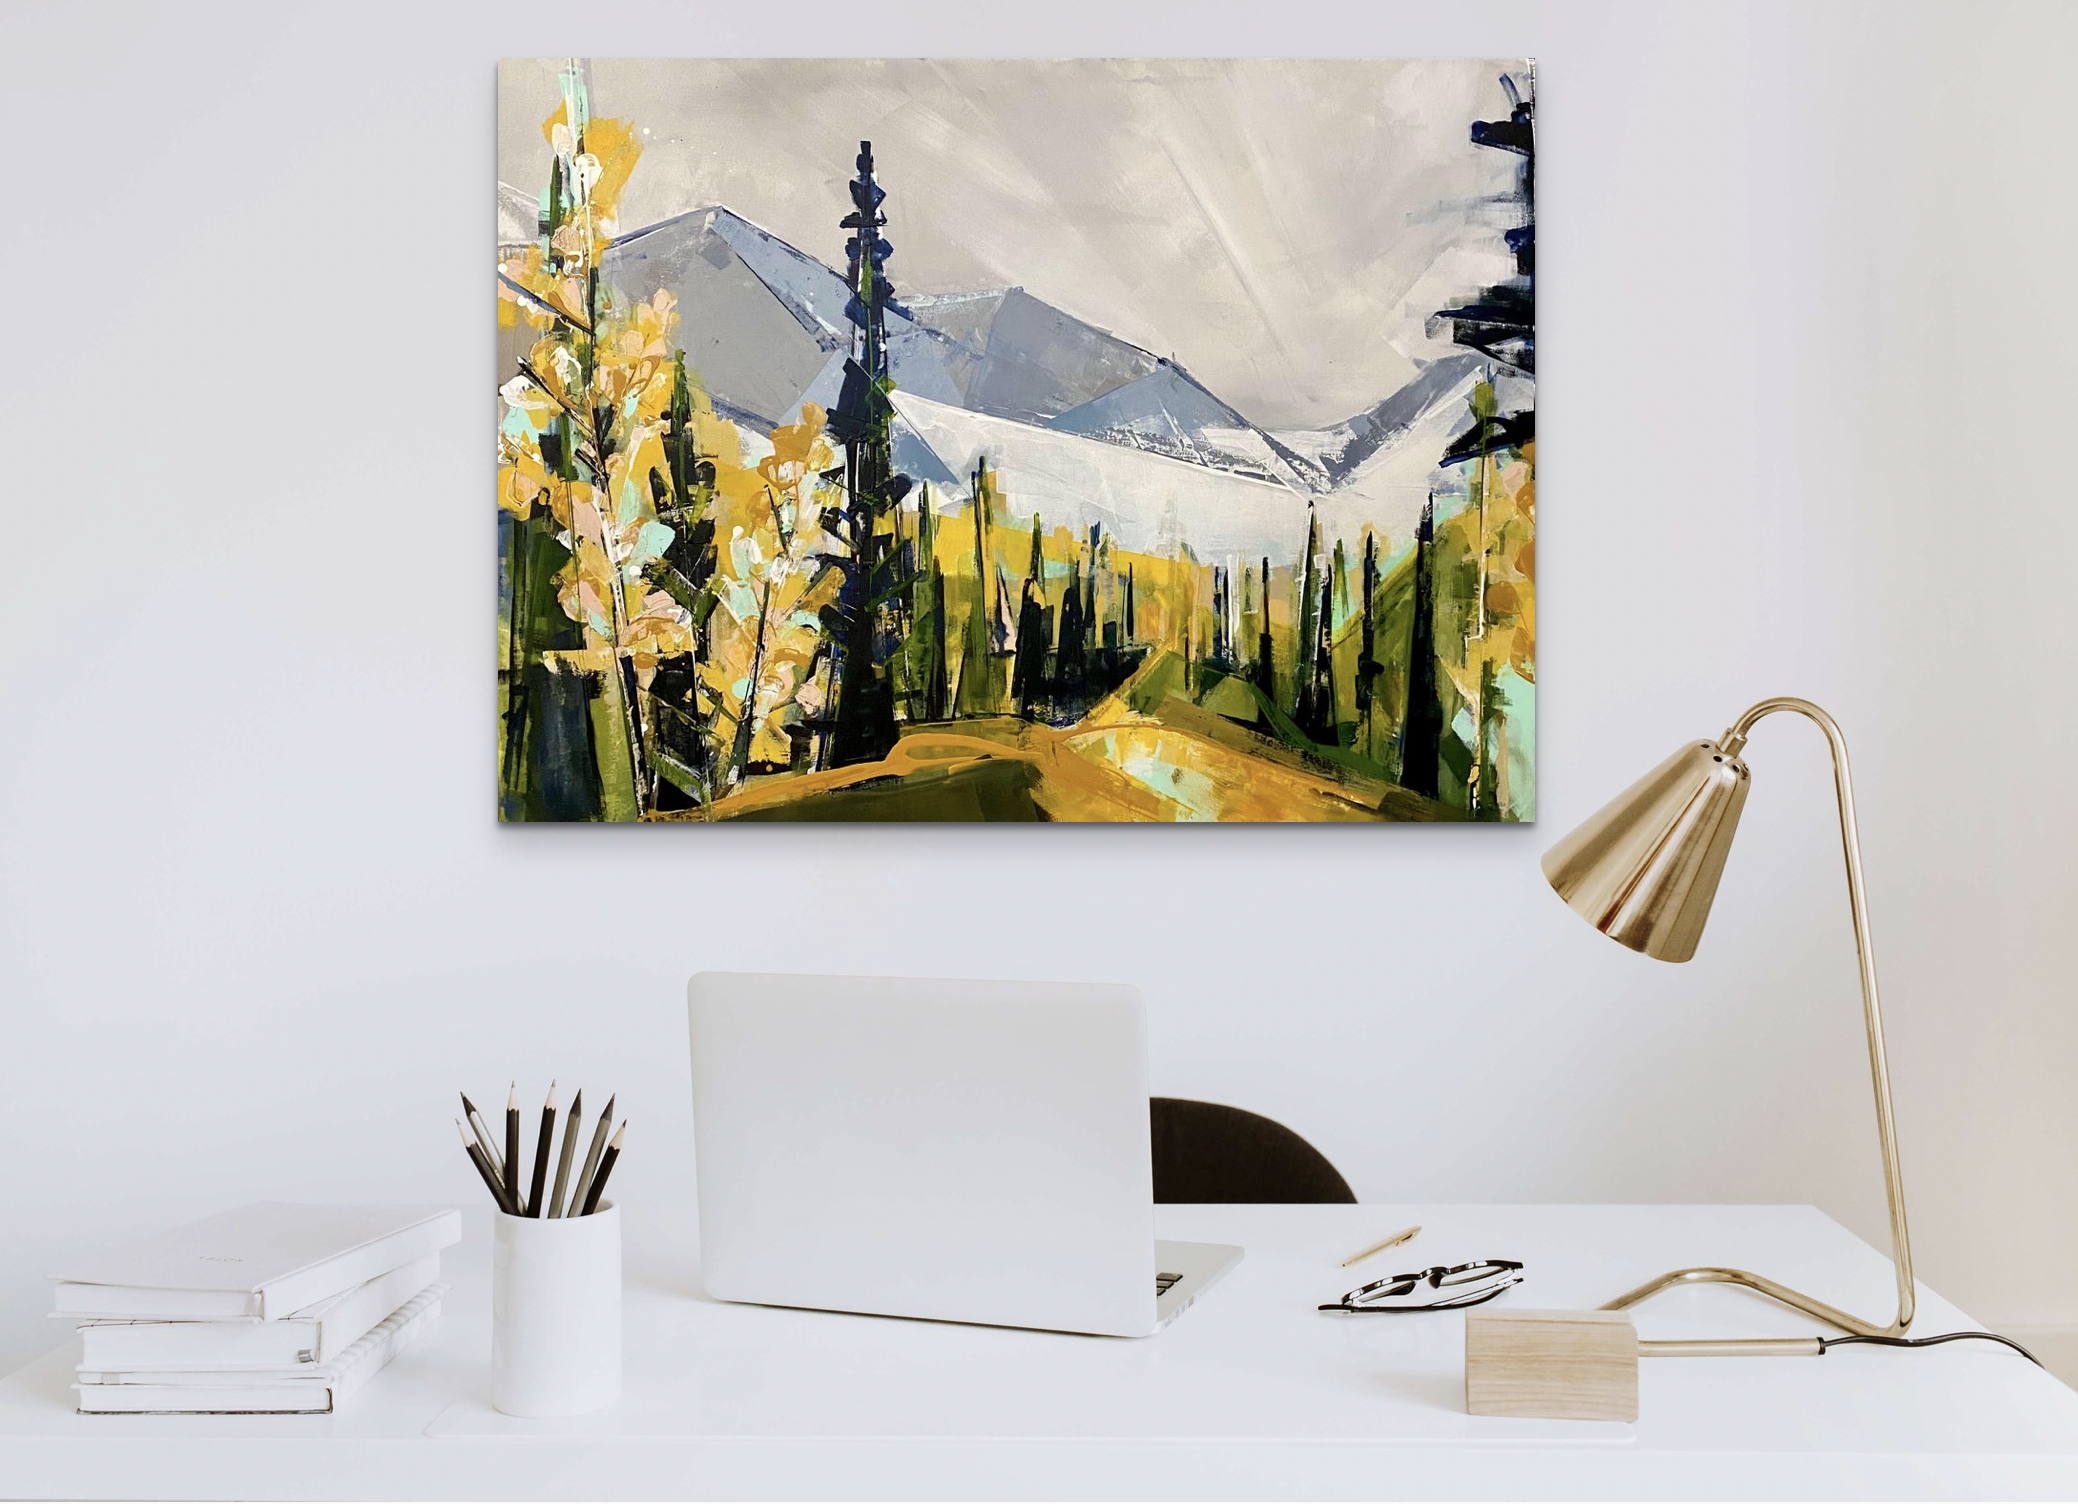 September Larches by Katie Leahul | Effusion Art Gallery + Cast Glass Studio, Invermere BC